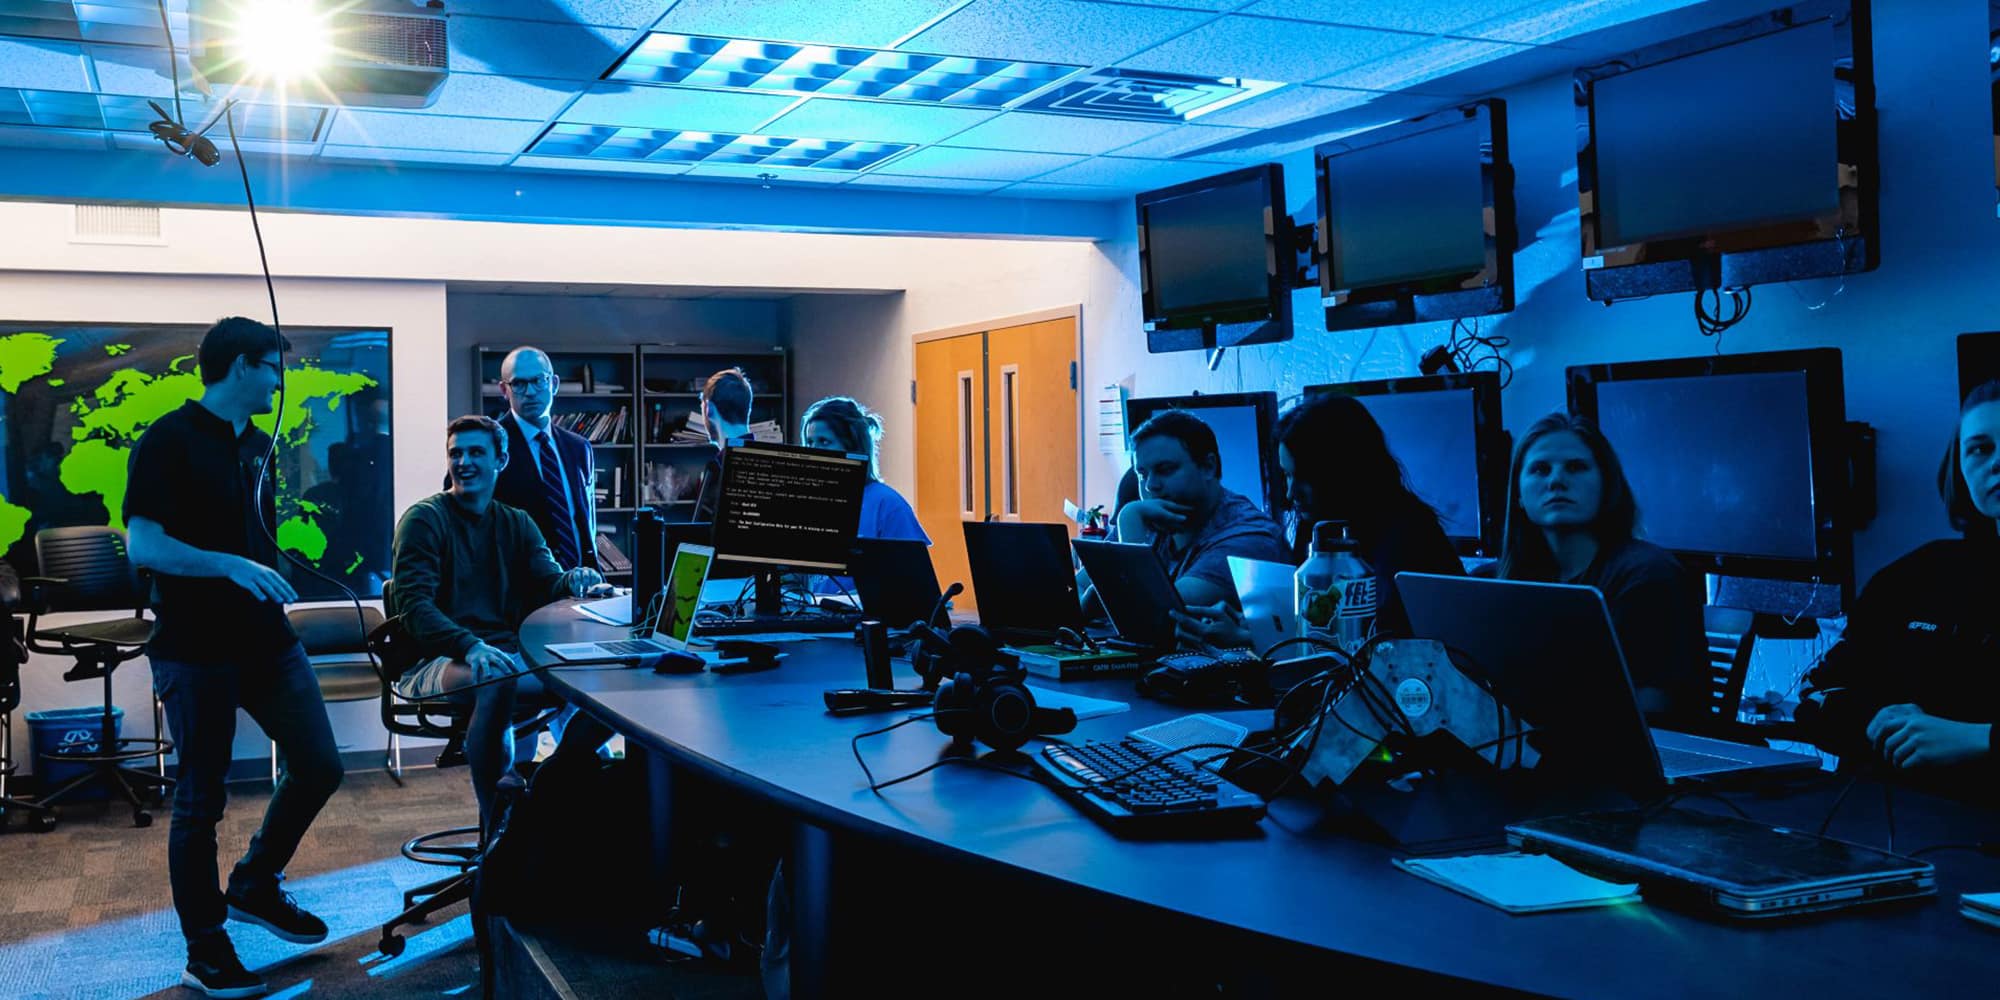 Global Security and Intelligence Studies lessons include class exercises where students conduct practical emergency response drills using software simulation programs developed by the Federal Emergency Management Agency (FEMA). (Photo: Embry-Riddle / Connor McShane)